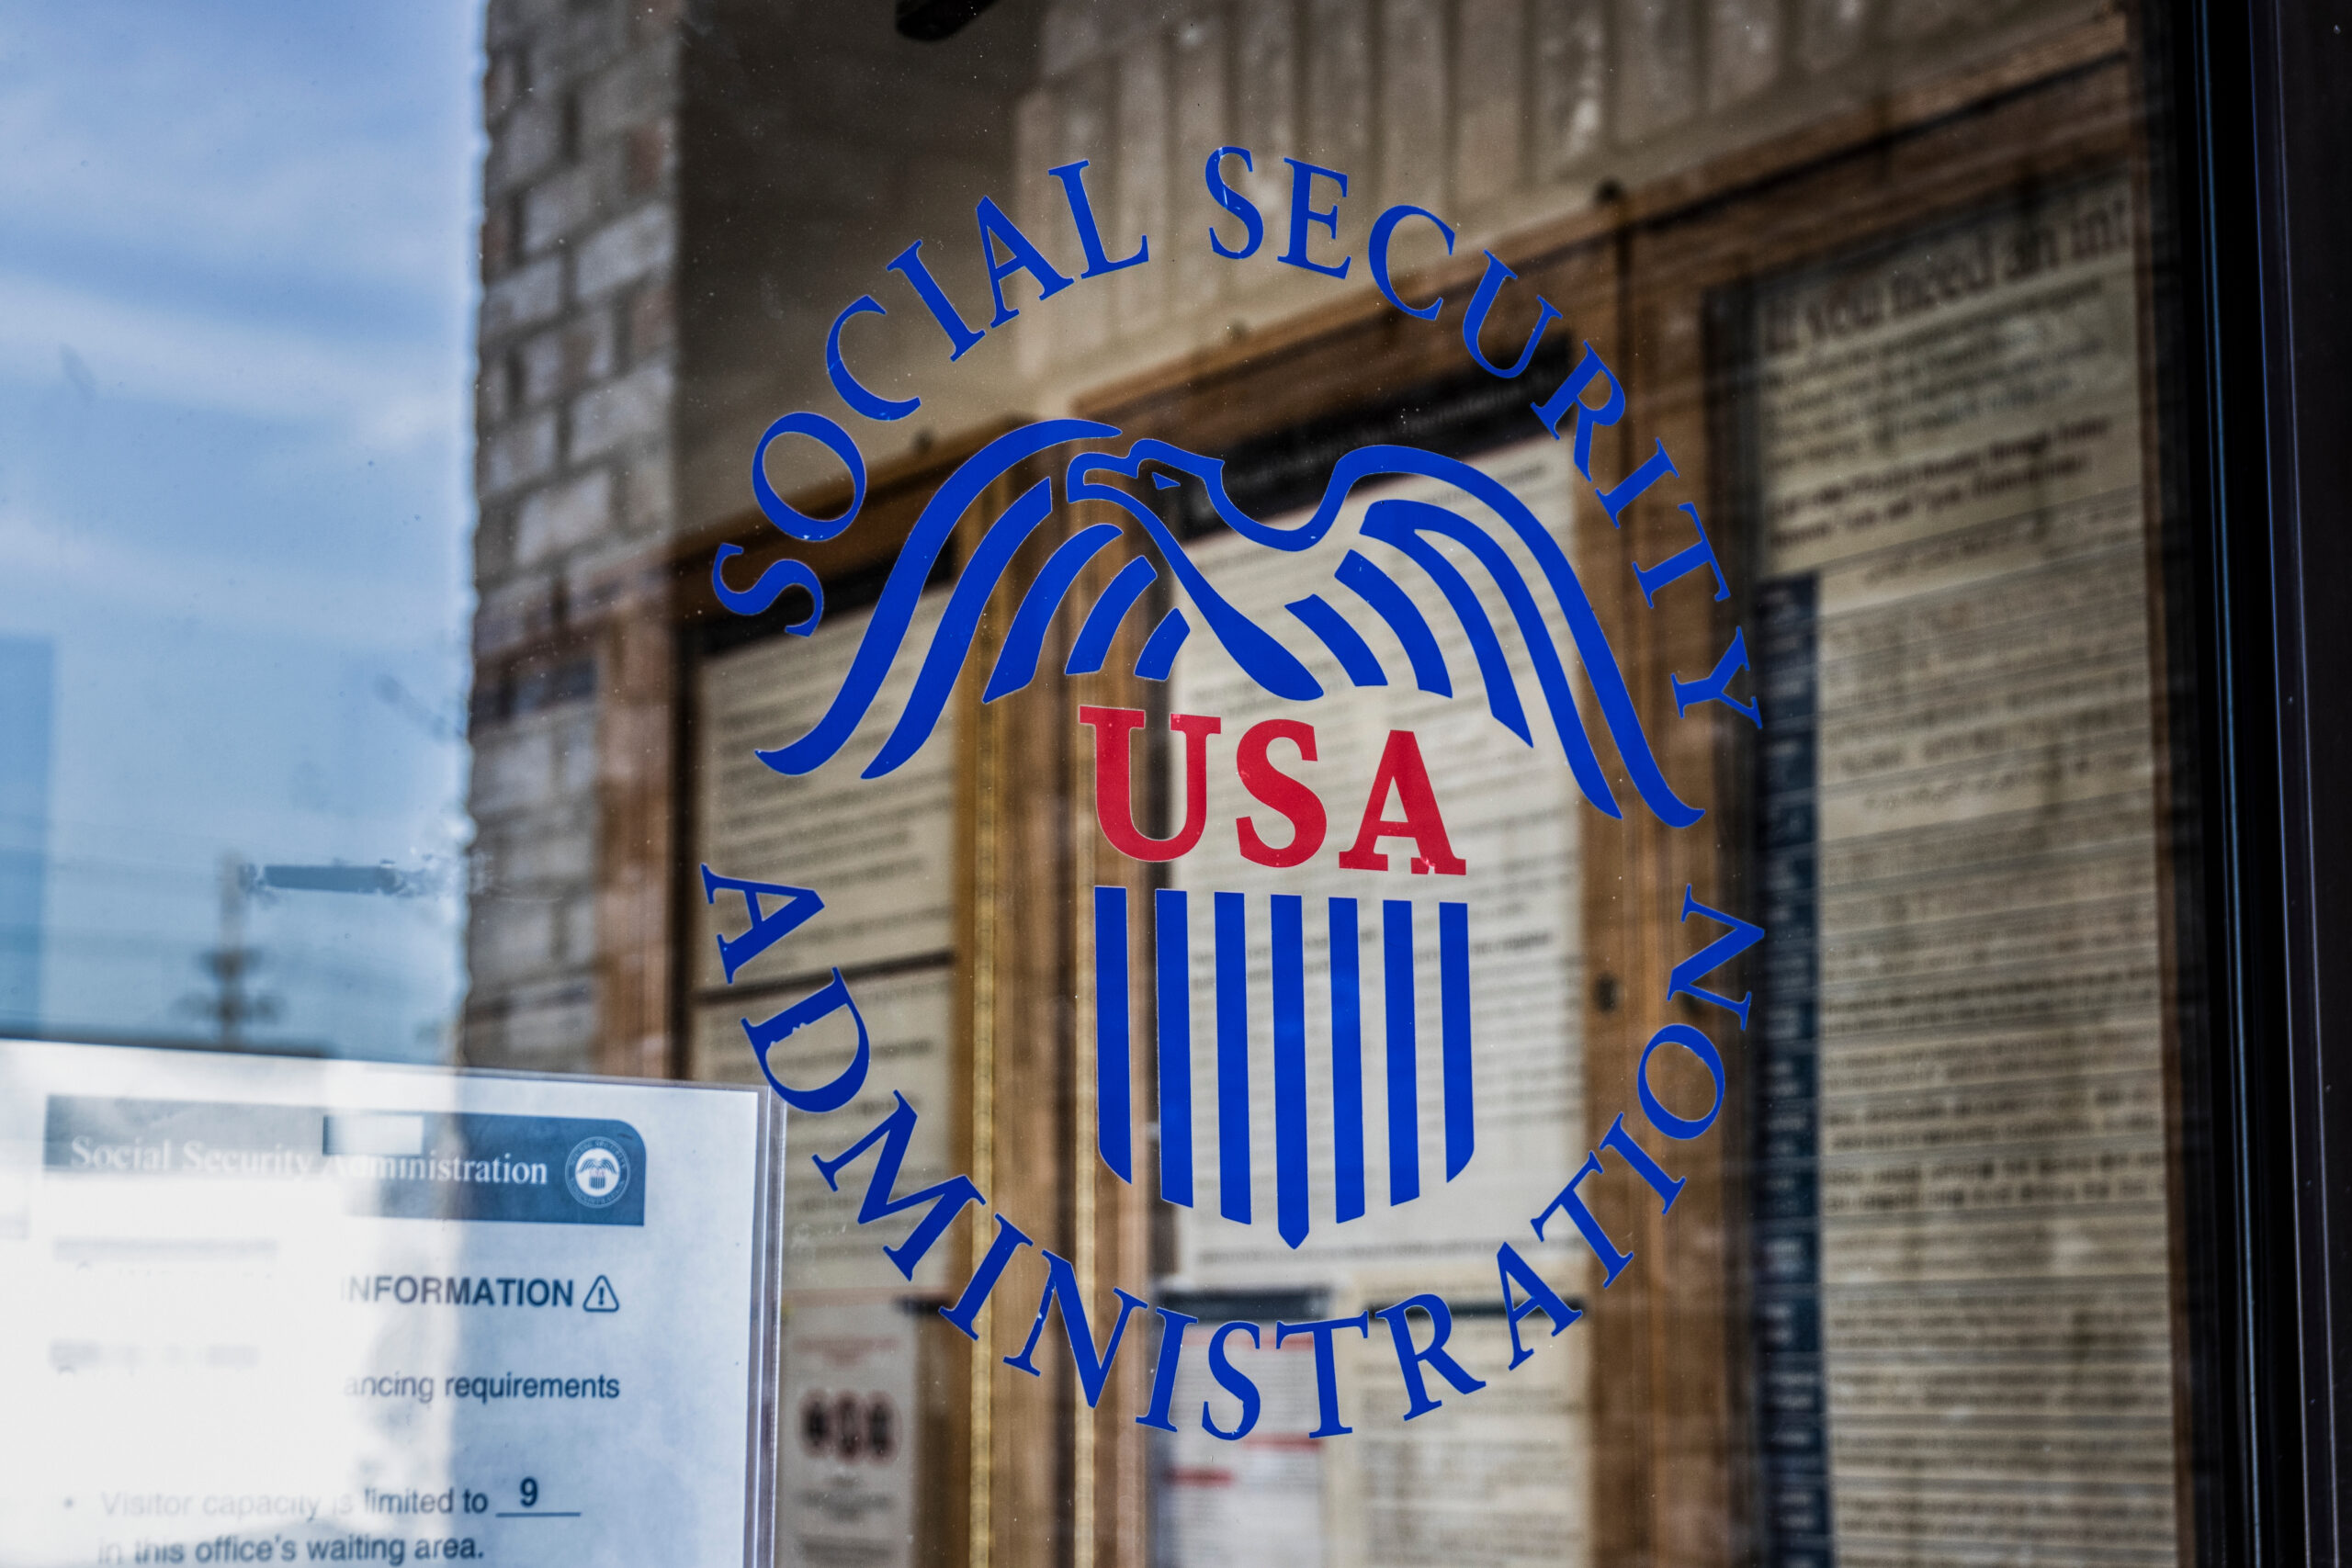 Richmond - Circa April 2022: Social Security Administration branch. The SSA administers retirement, disability, and survivors benefits.